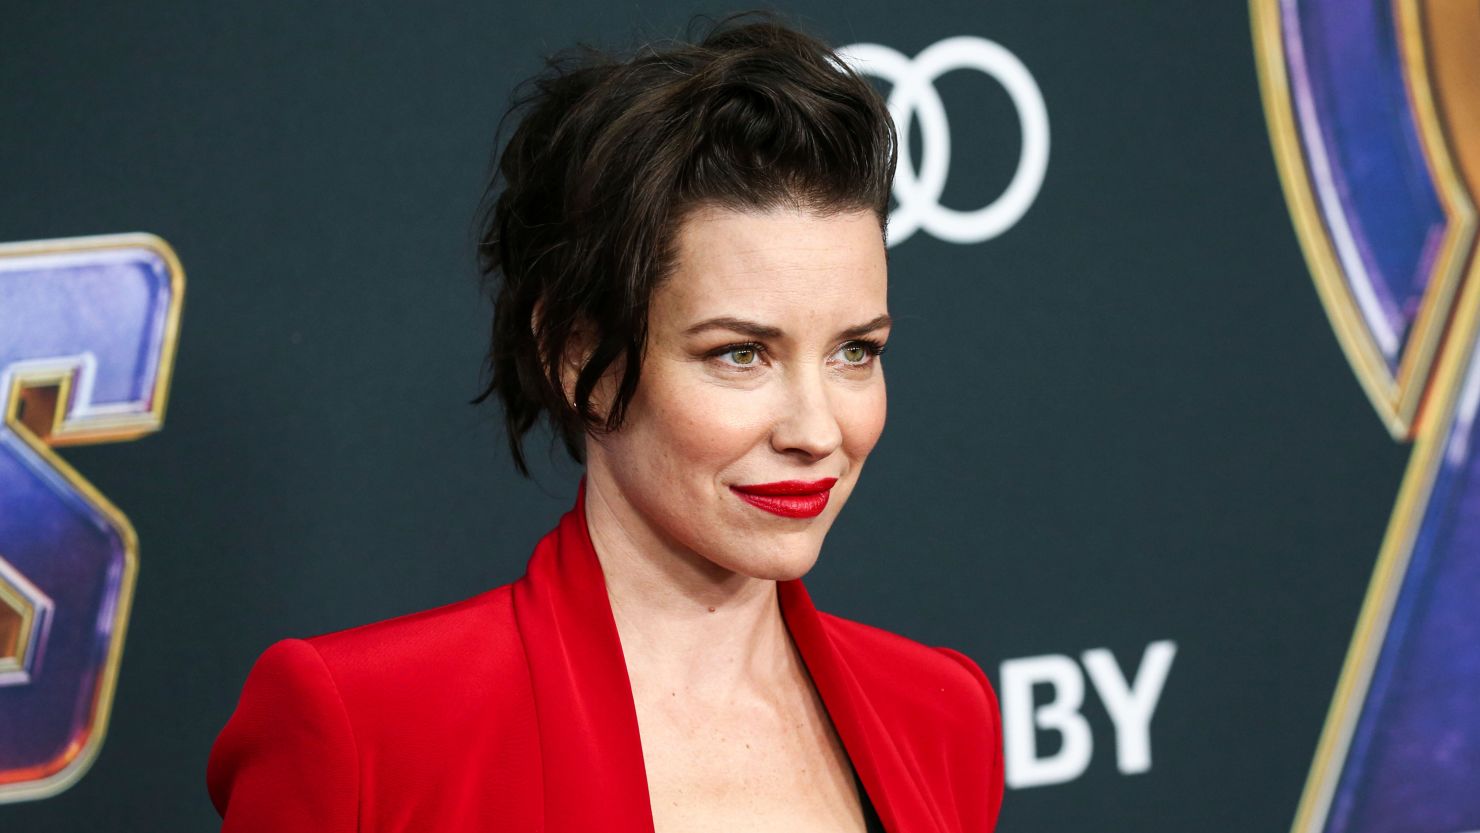 Evangeline Lilly attended a Washington rally against vaccine requirements, she told her Instagram followers, the same rally where Robert F. Kennedy, Jr. invoked Nazi Germany in a speech.